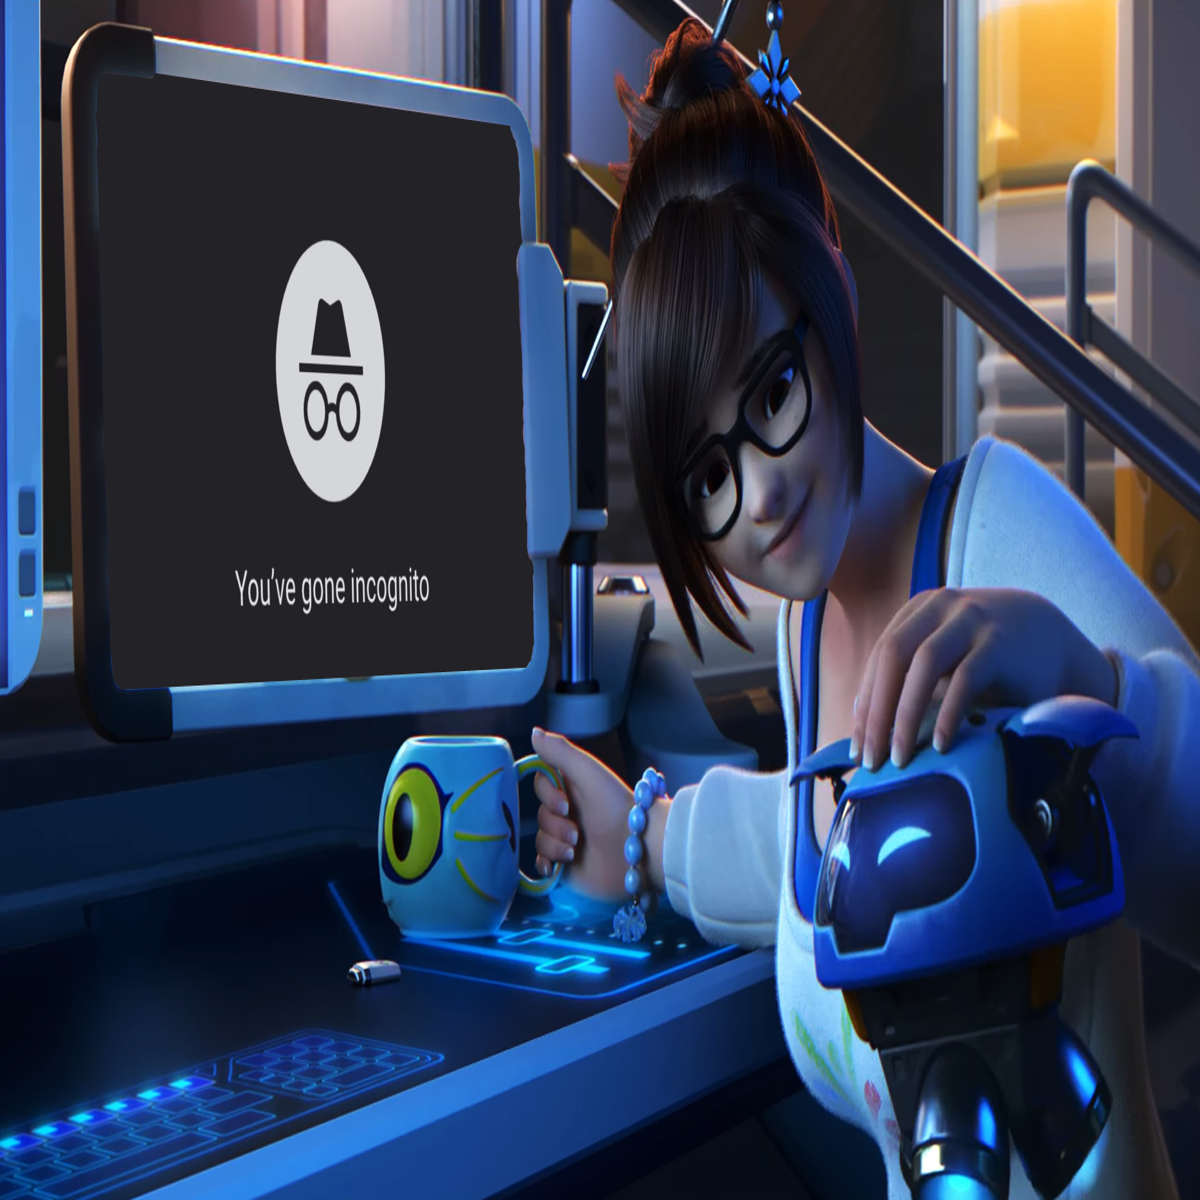 My Overwatch 2 Tracer Cosplay!! : r/Overwatch